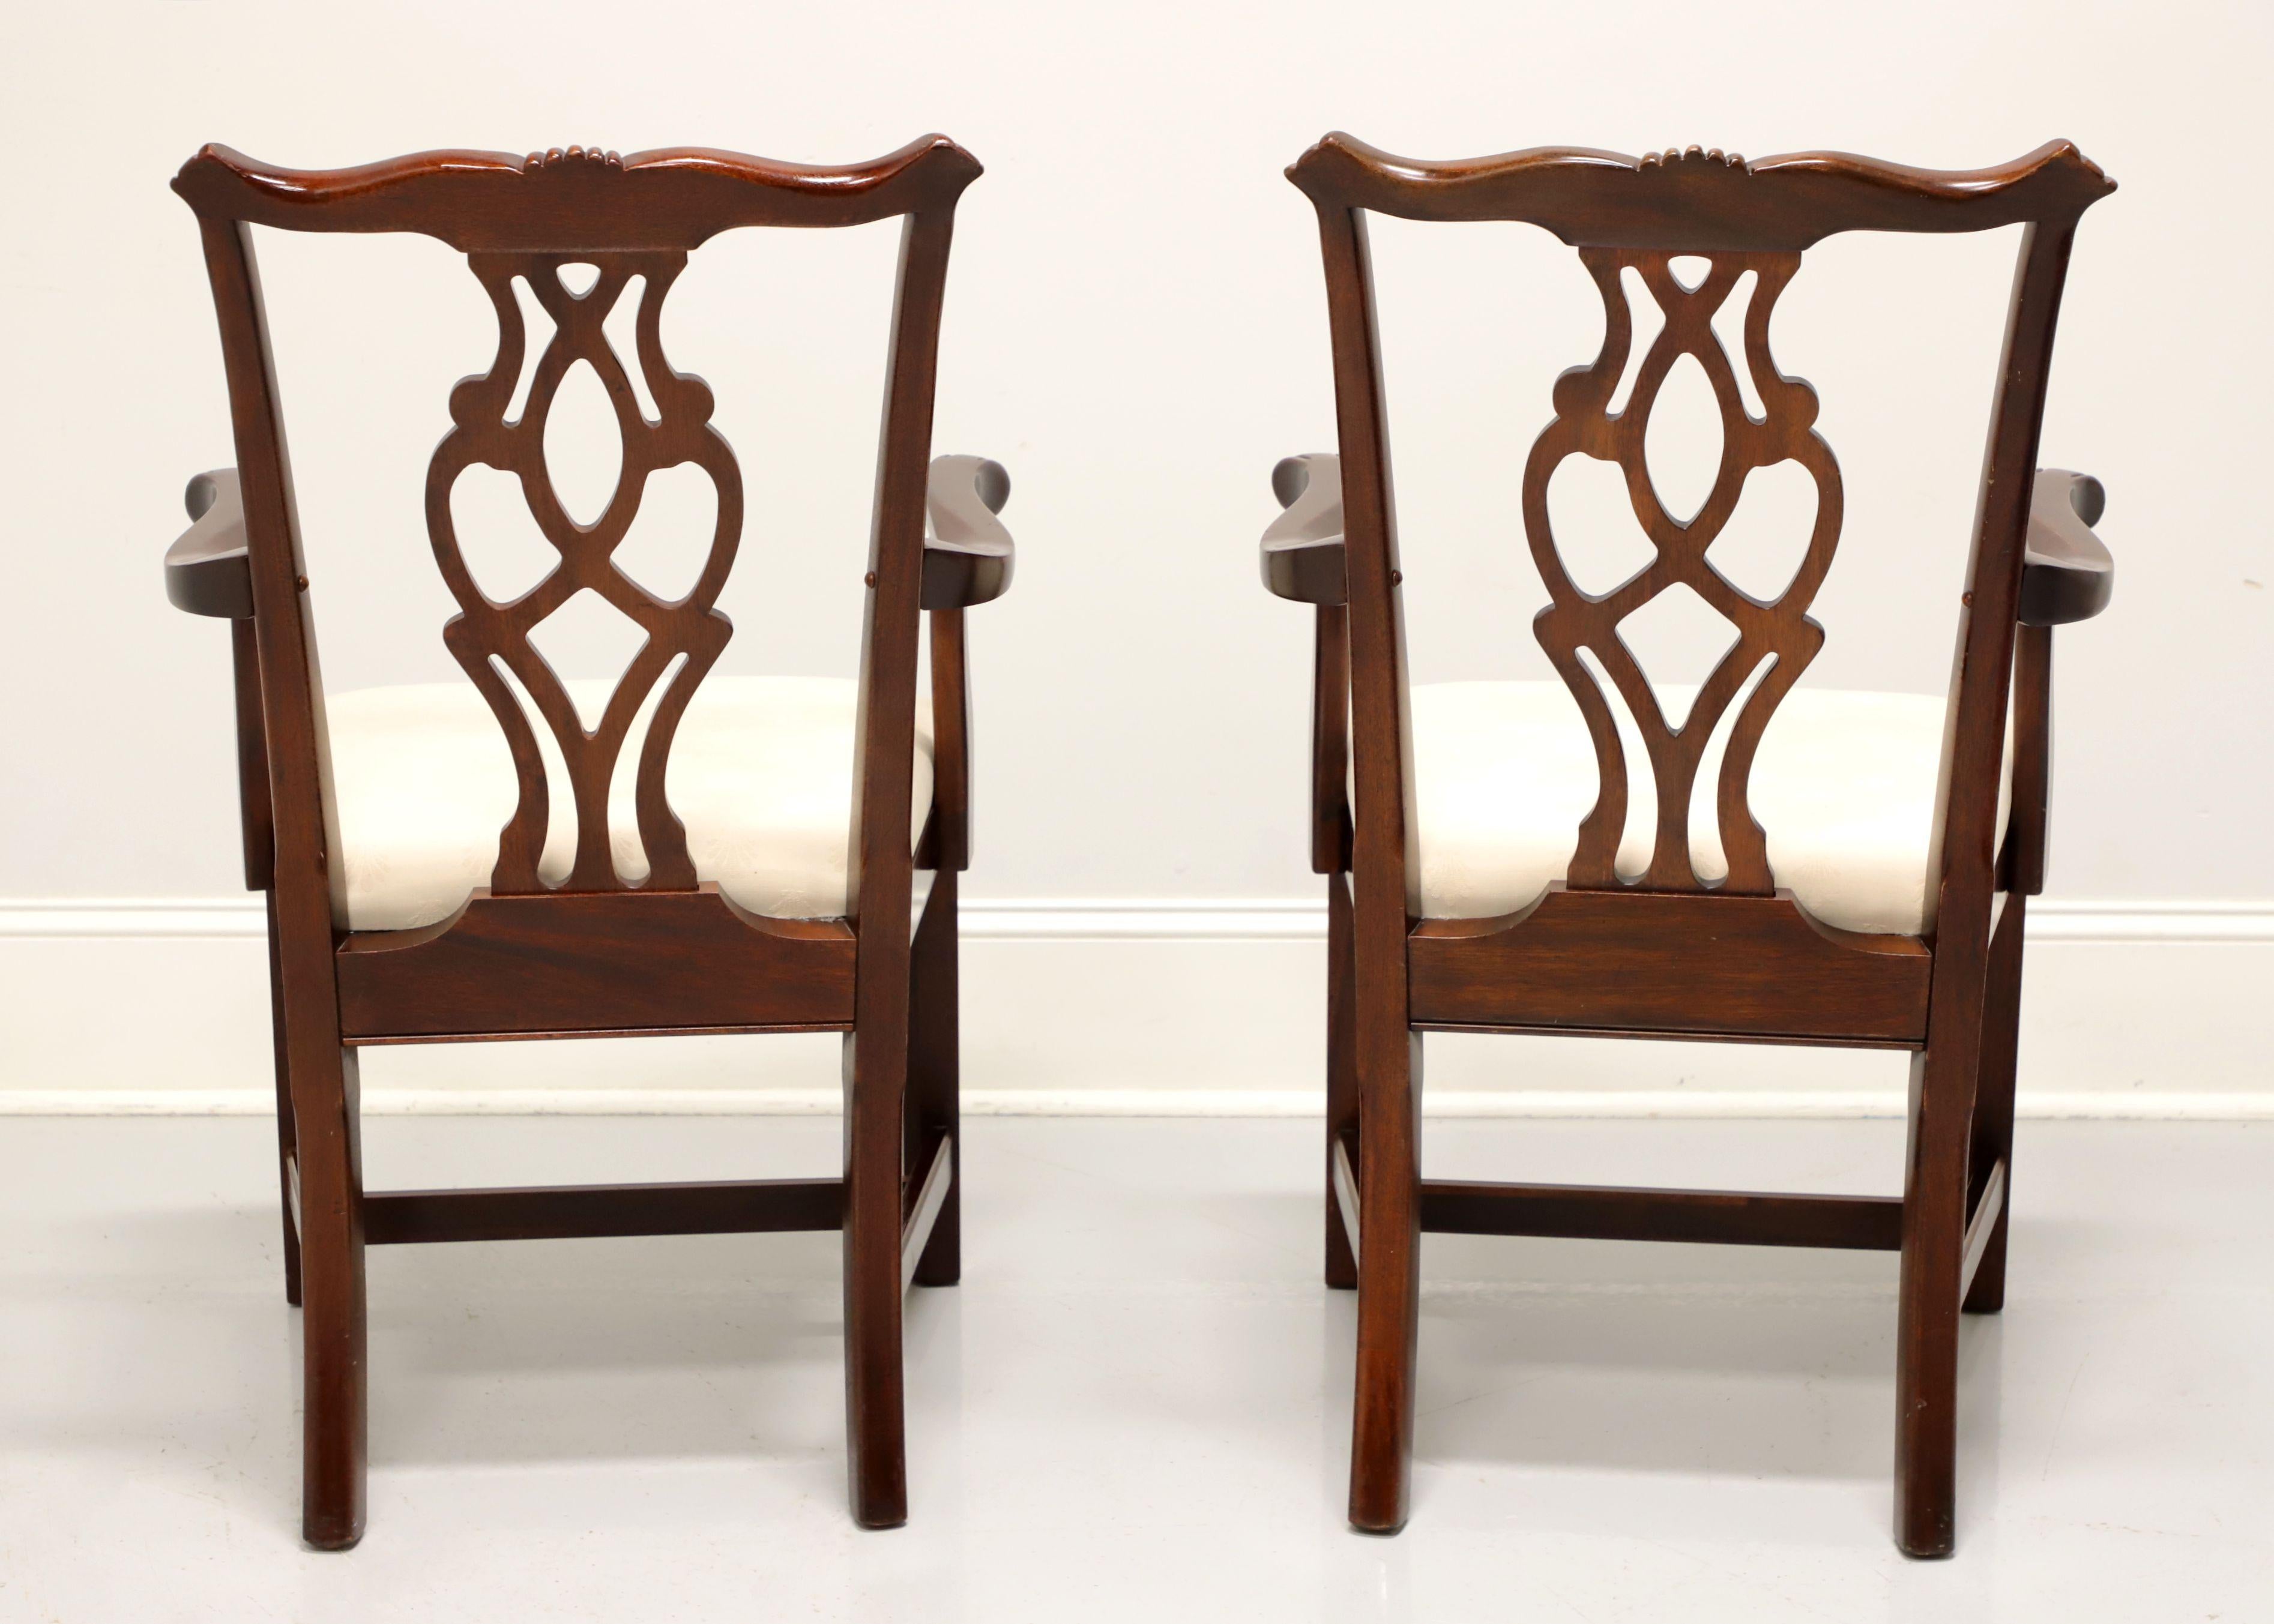 Fabric CRESENT Solid Mahogany Straight Leg Chippendale Dining Armchairs - Pair